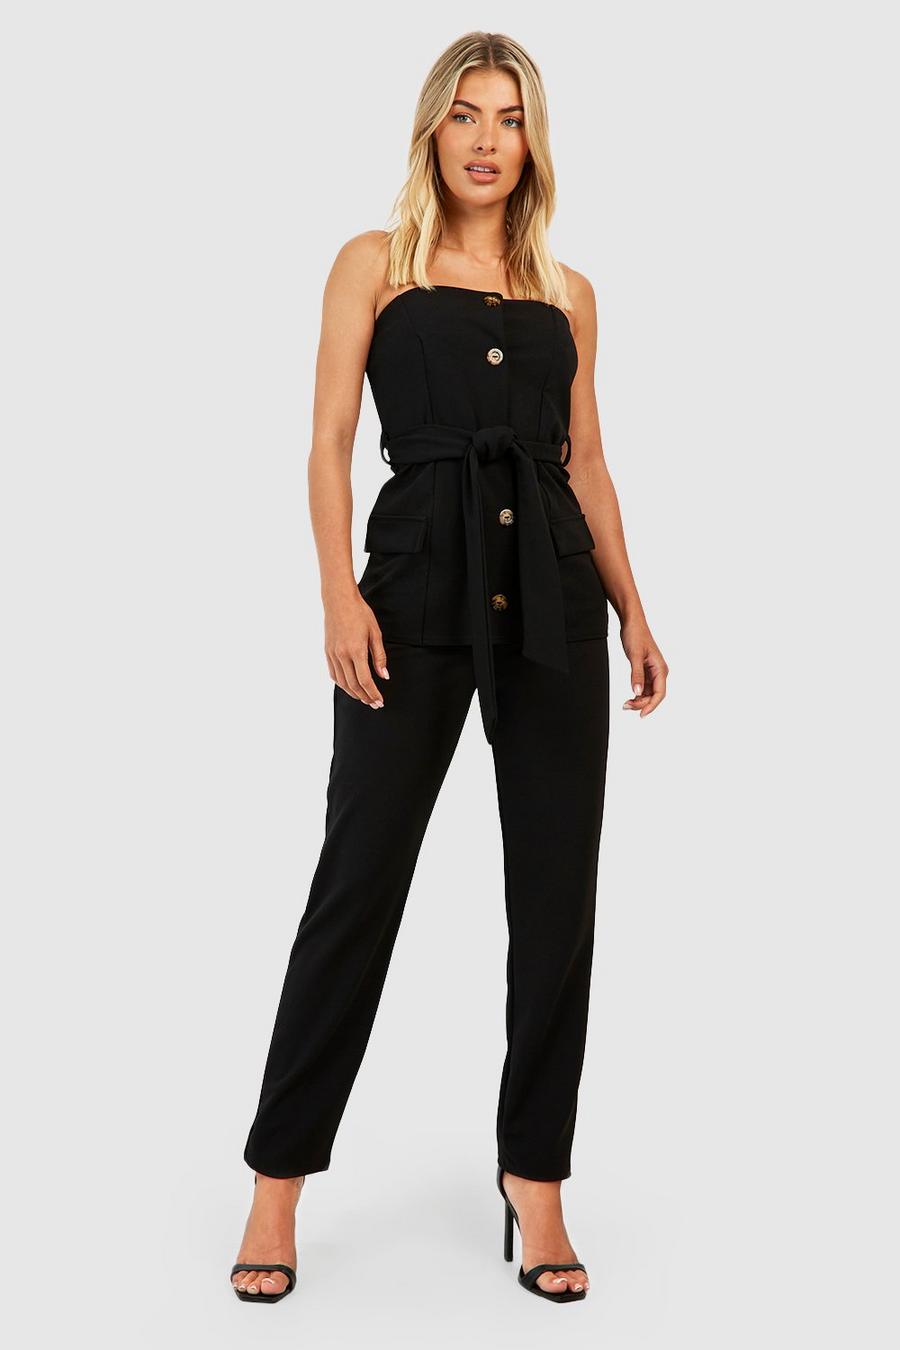 Black Crepe Ankle Grazer Trousers